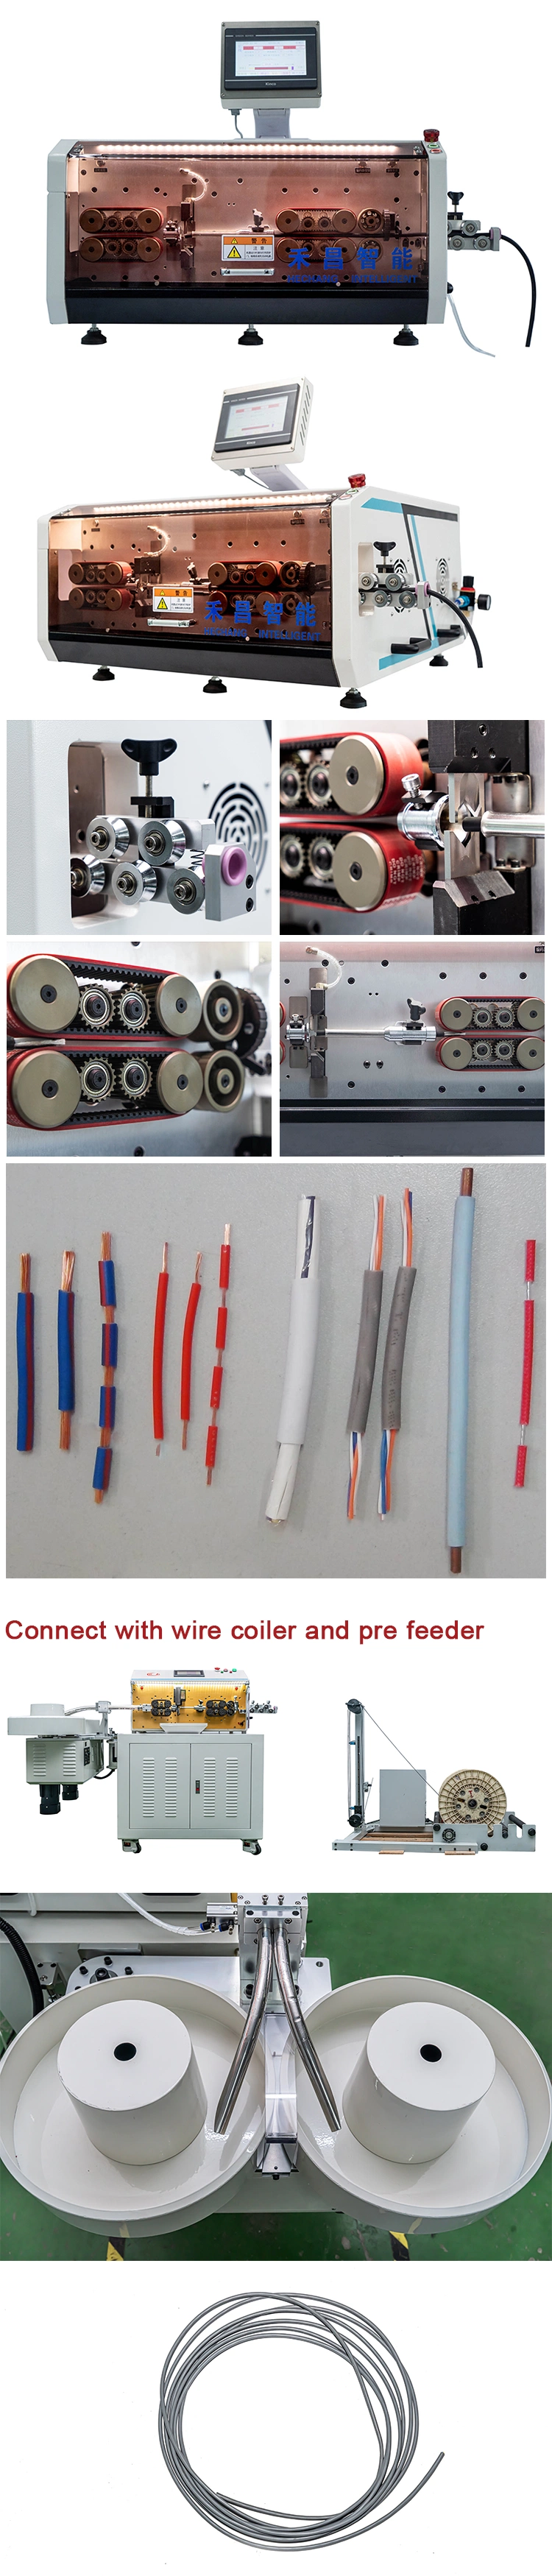 Sheath Cable Wire Cutting Stripping Machine Connect with Wire Coiler and Prefeeder Machine